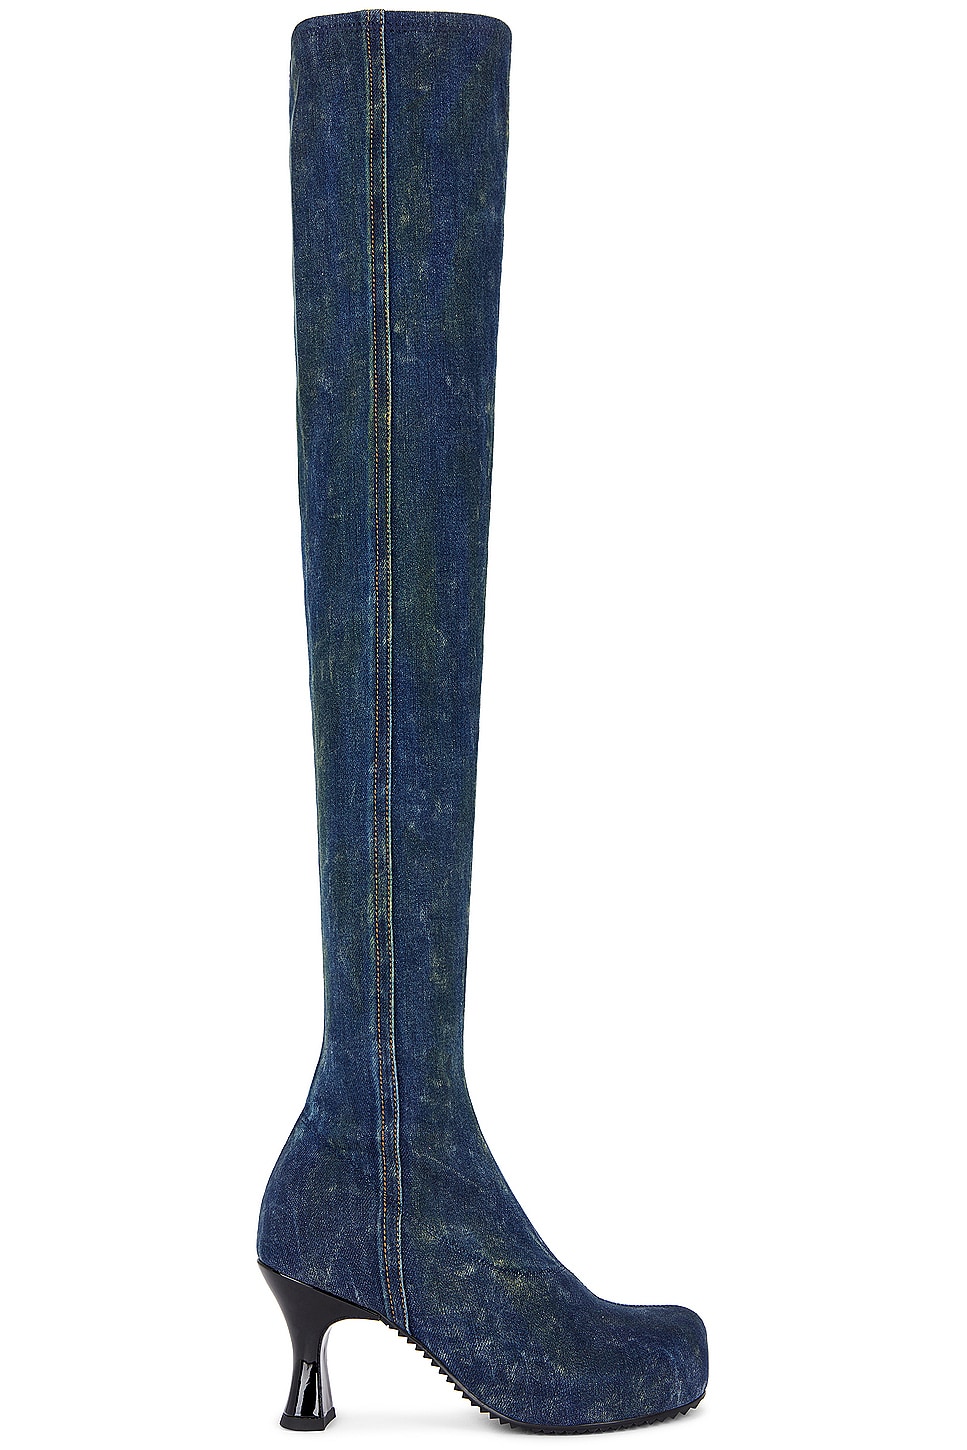 Woodstock Thigh High Boot in Blue